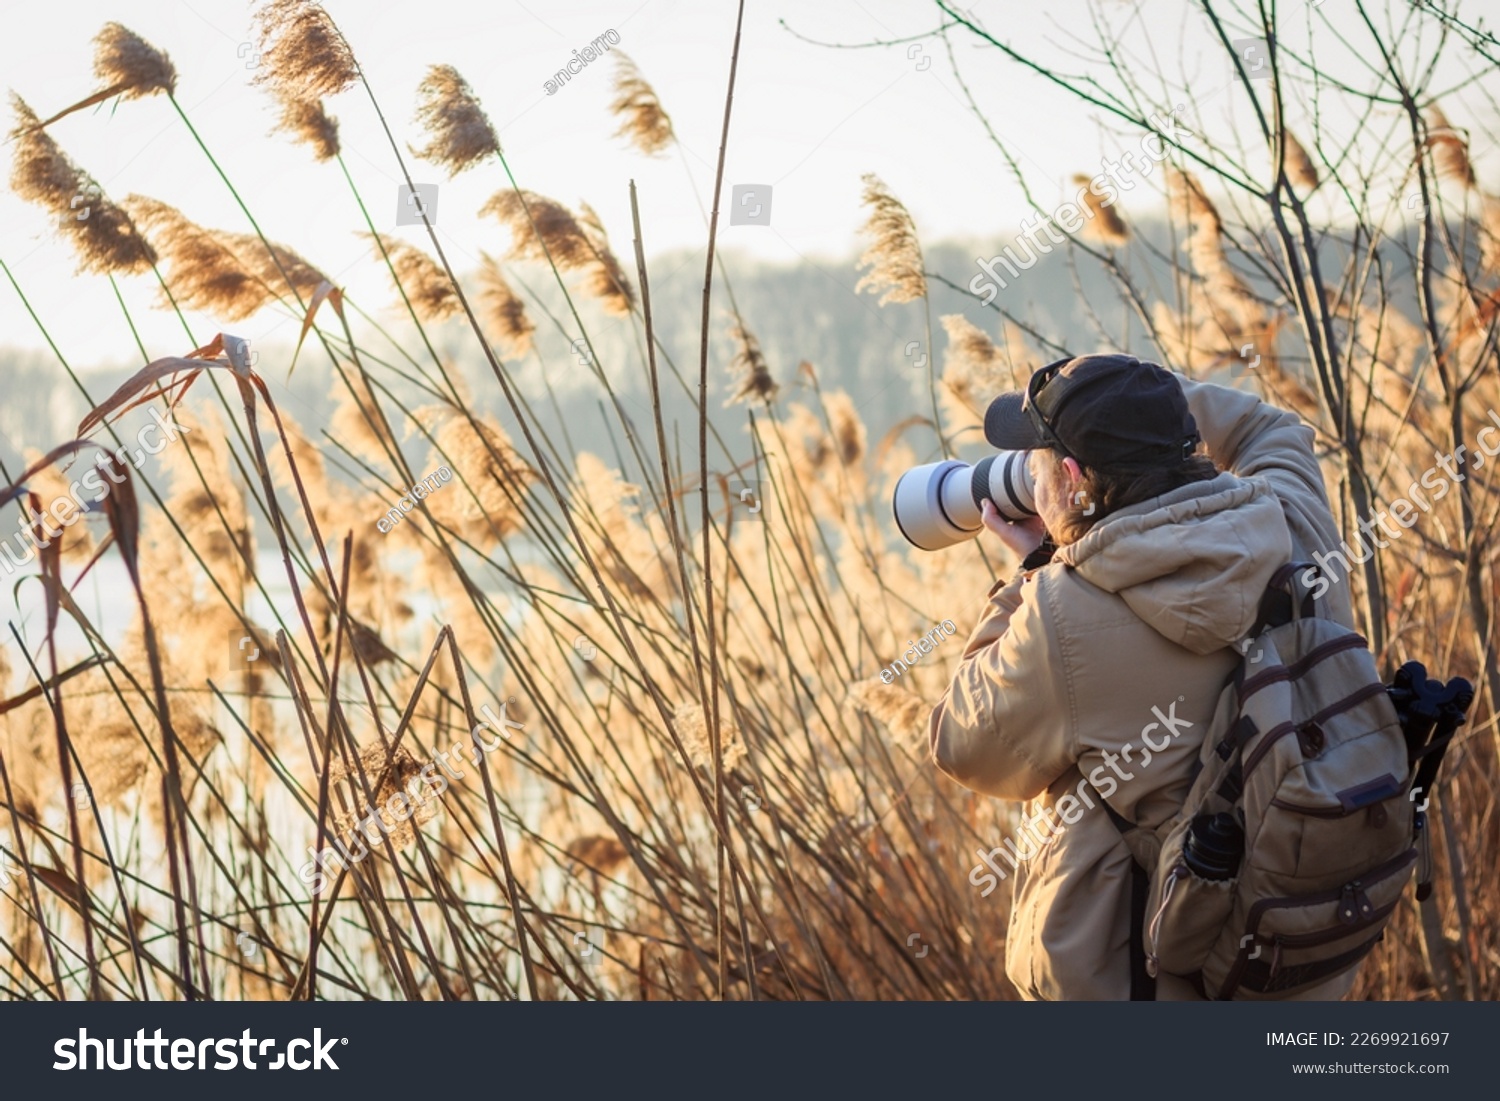 Photographer with camera hiding behind reeds at lake taking pictures of wildlife. Outdoors leisure activity #2269921697